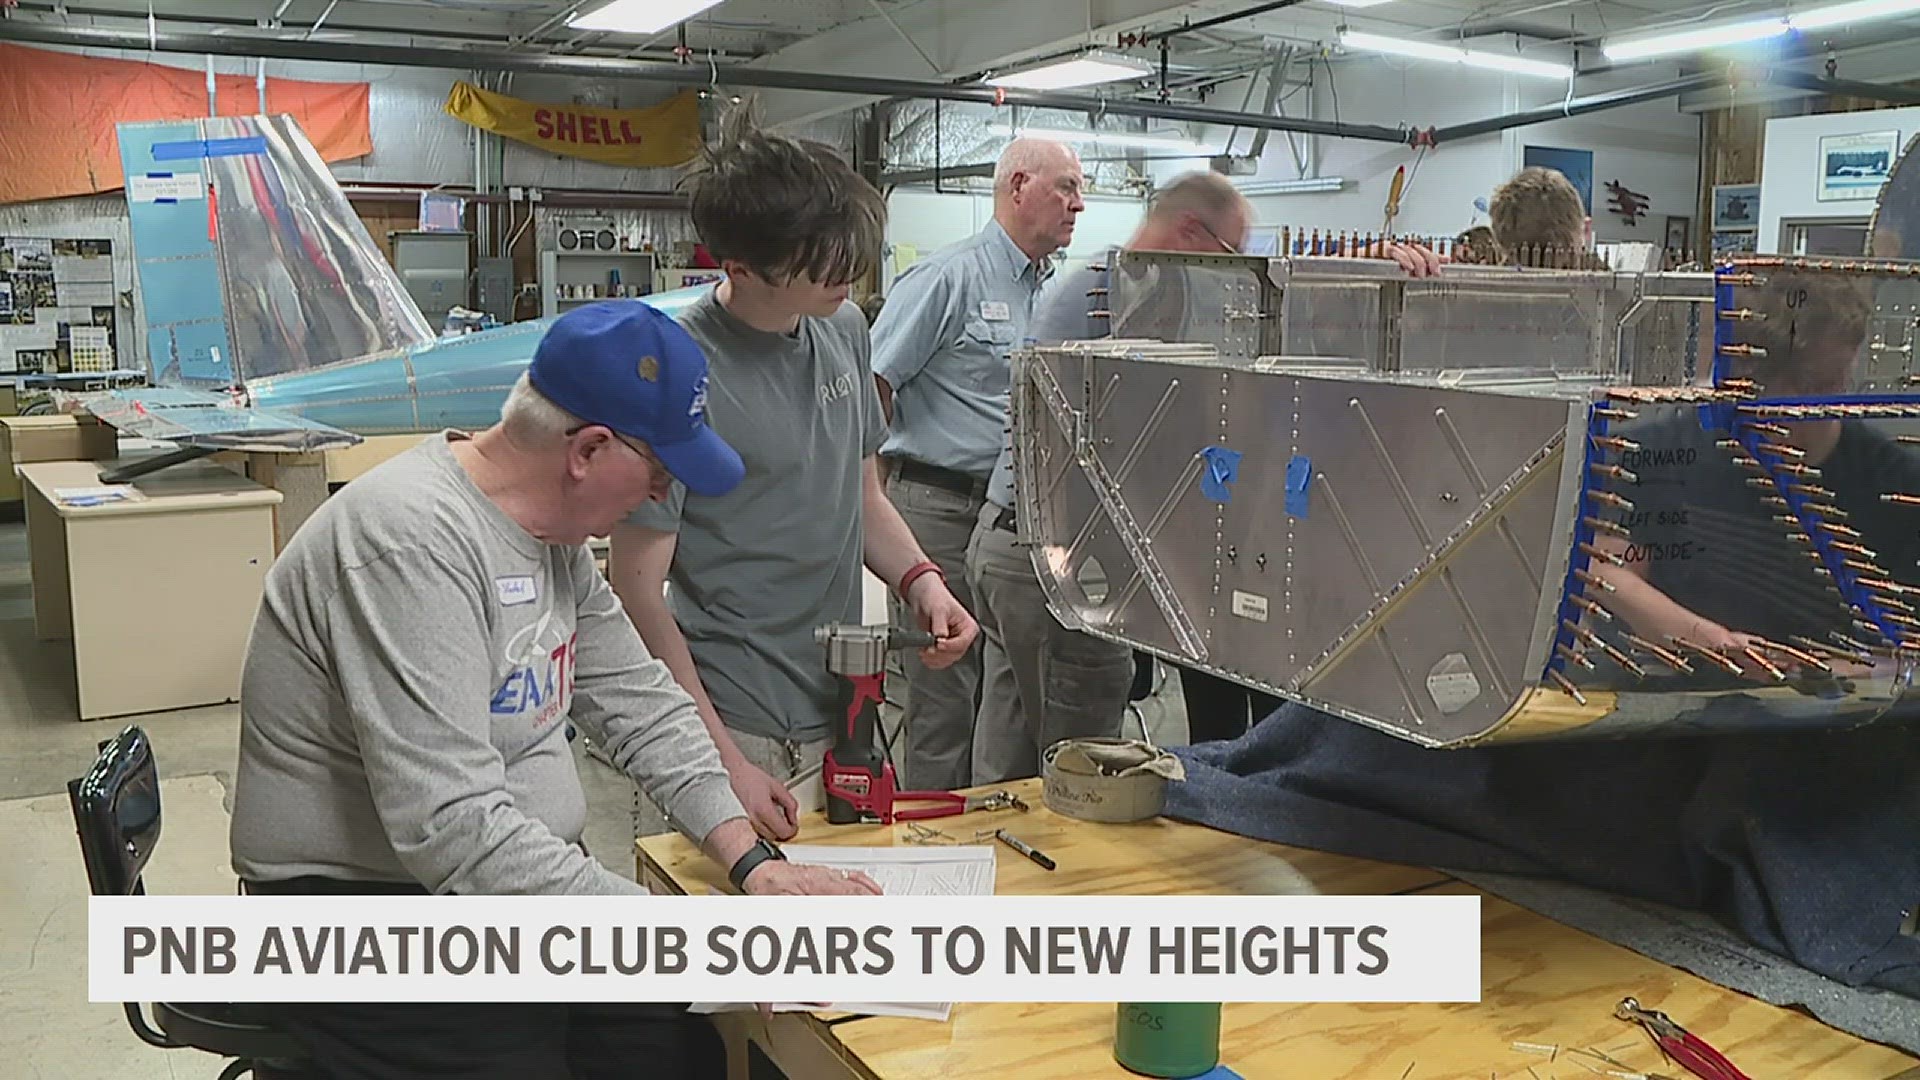 For the past two school years, the PNB Aviation Club has been hard at work building a RV-12iS model aircraft.